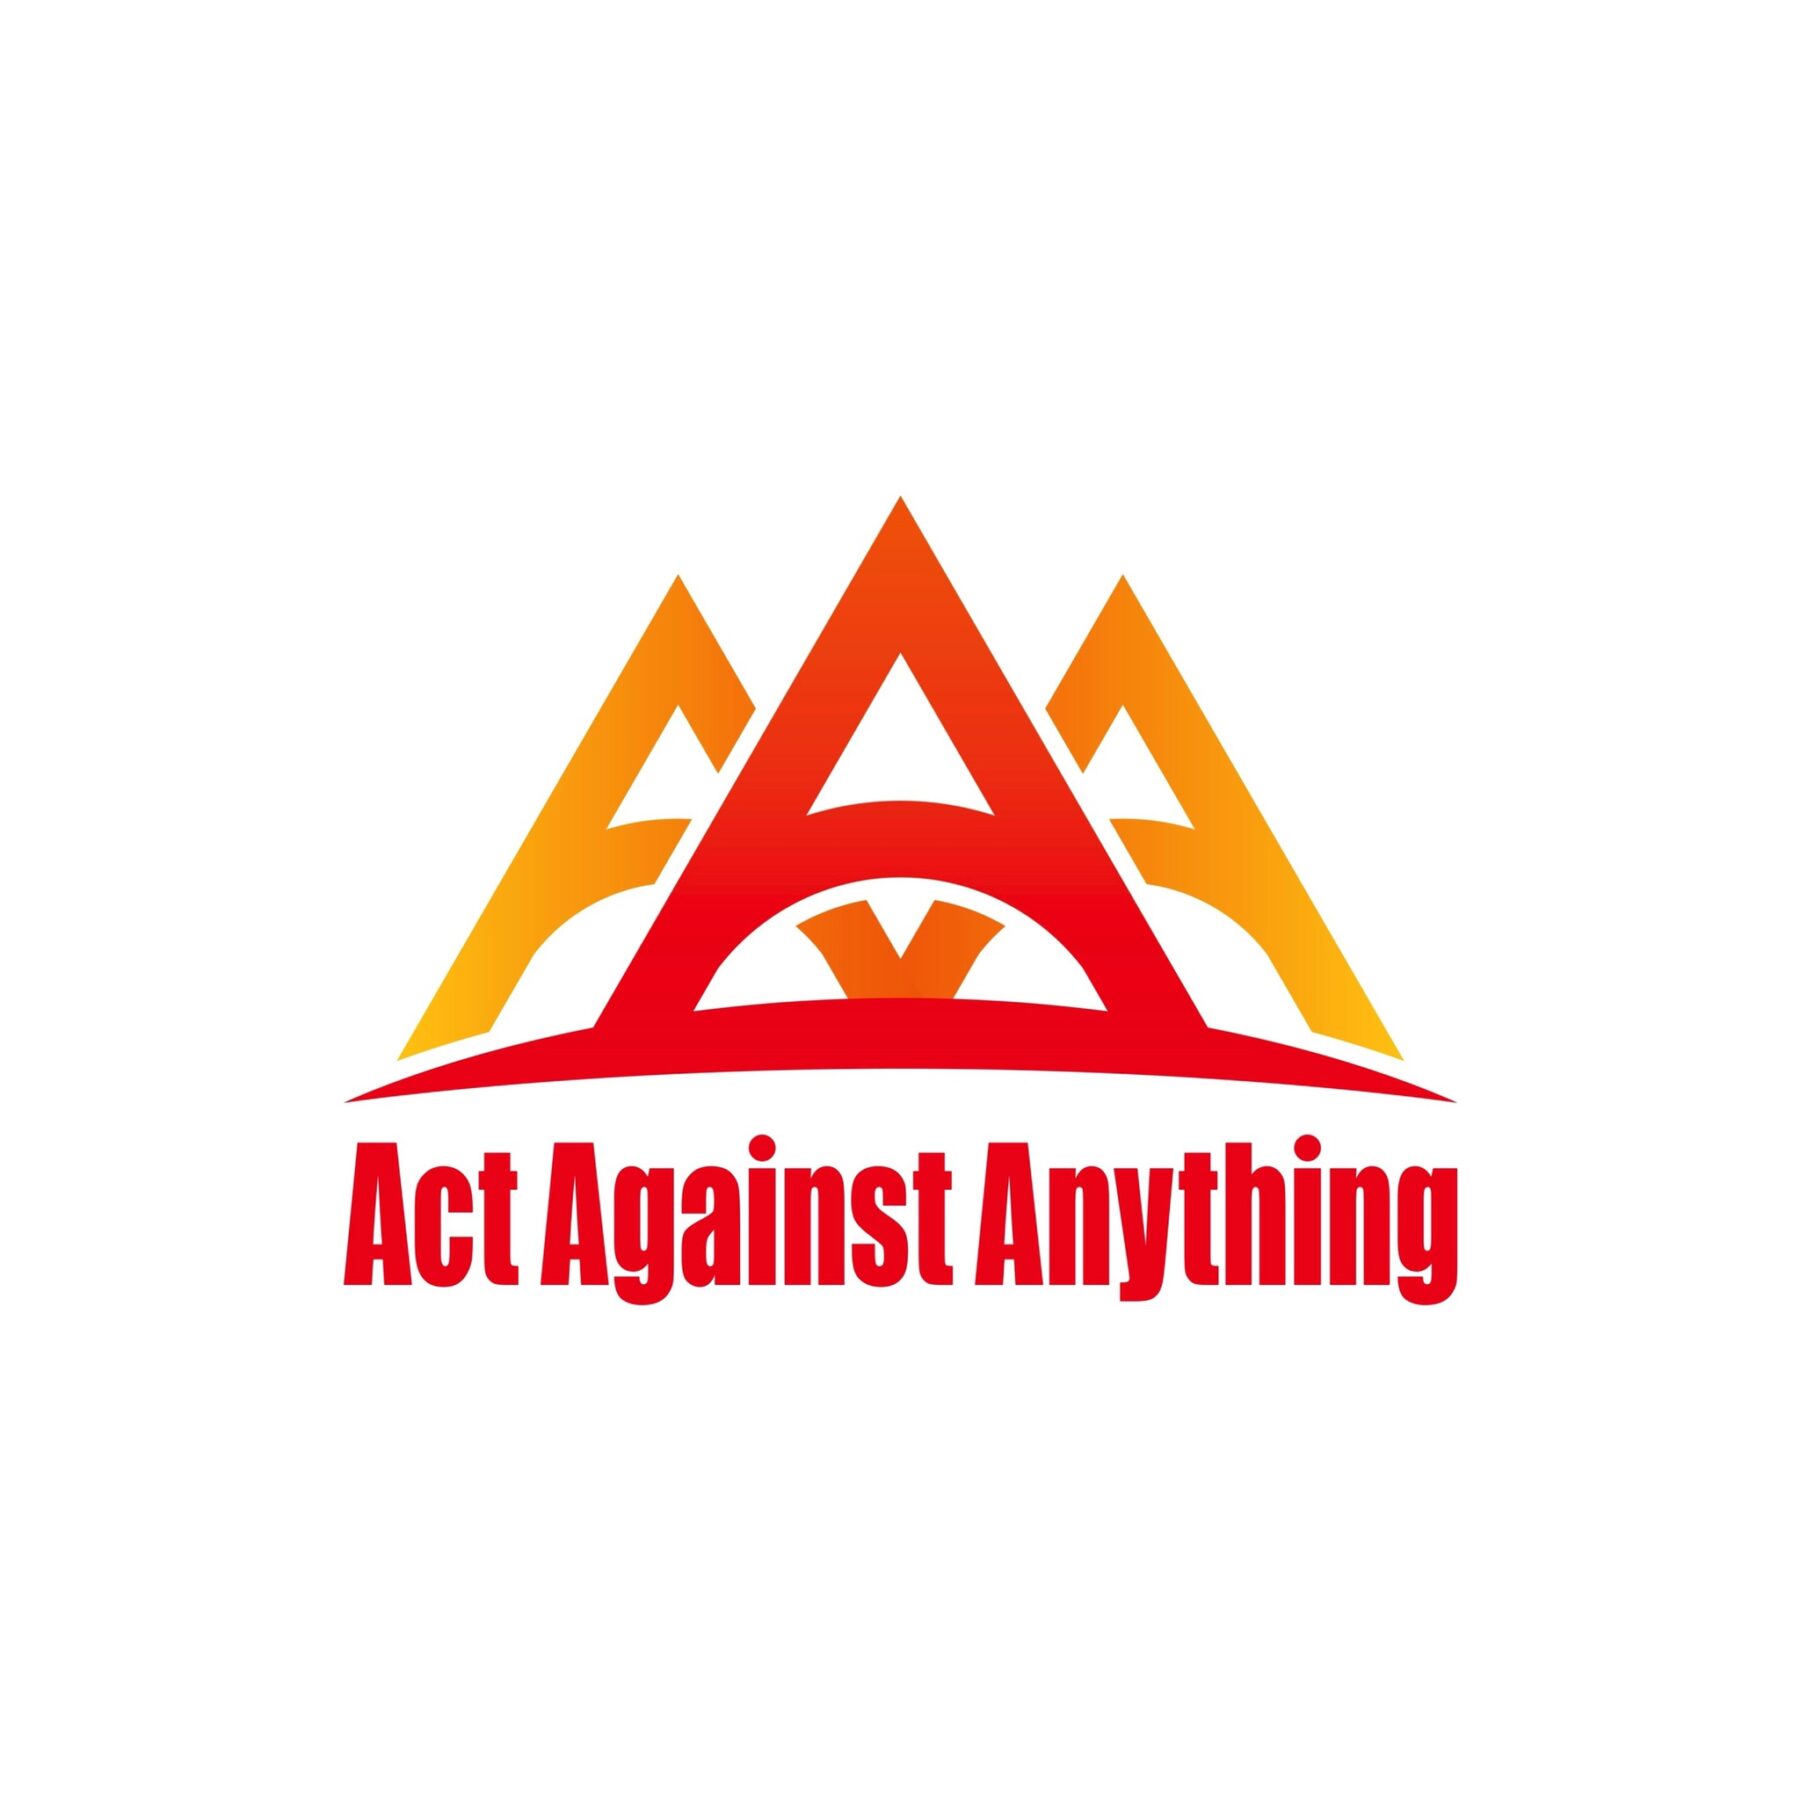 Act Against Anything VOL.2「THE VARIETY 28」4年ぶりブリ生舞台！全身全霊！心を込めて歌って踊って皆でチャリティ全員集合！